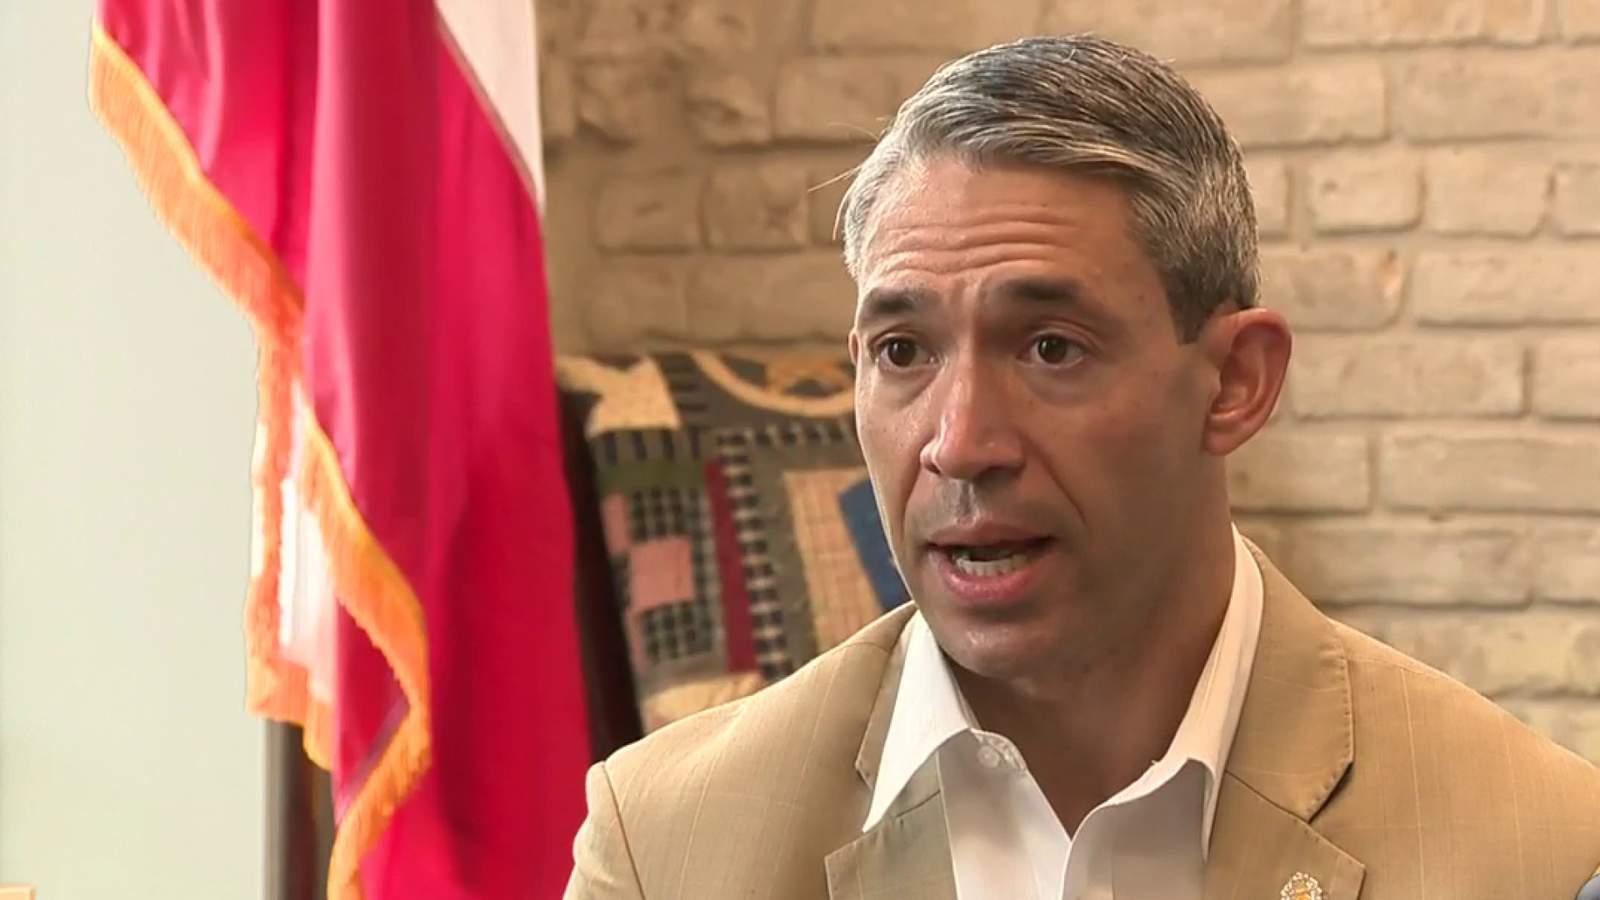 Mayor Ron Nirenberg talks about the change he wants to see in San Antonio